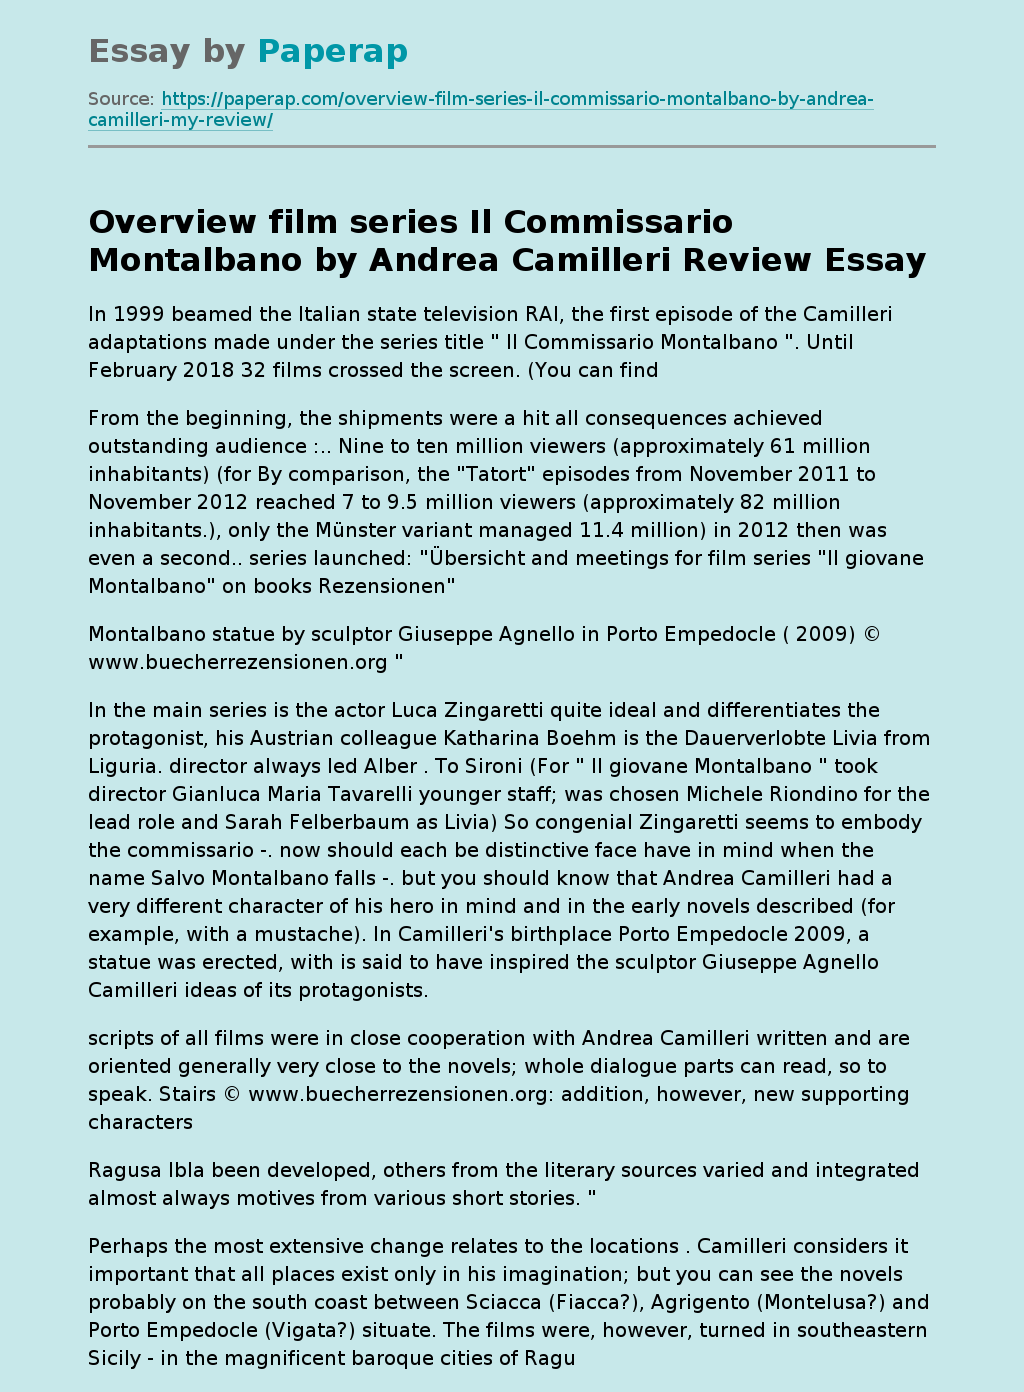 Overview film series Il Commissario Montalbano by Andrea Camilleri Review